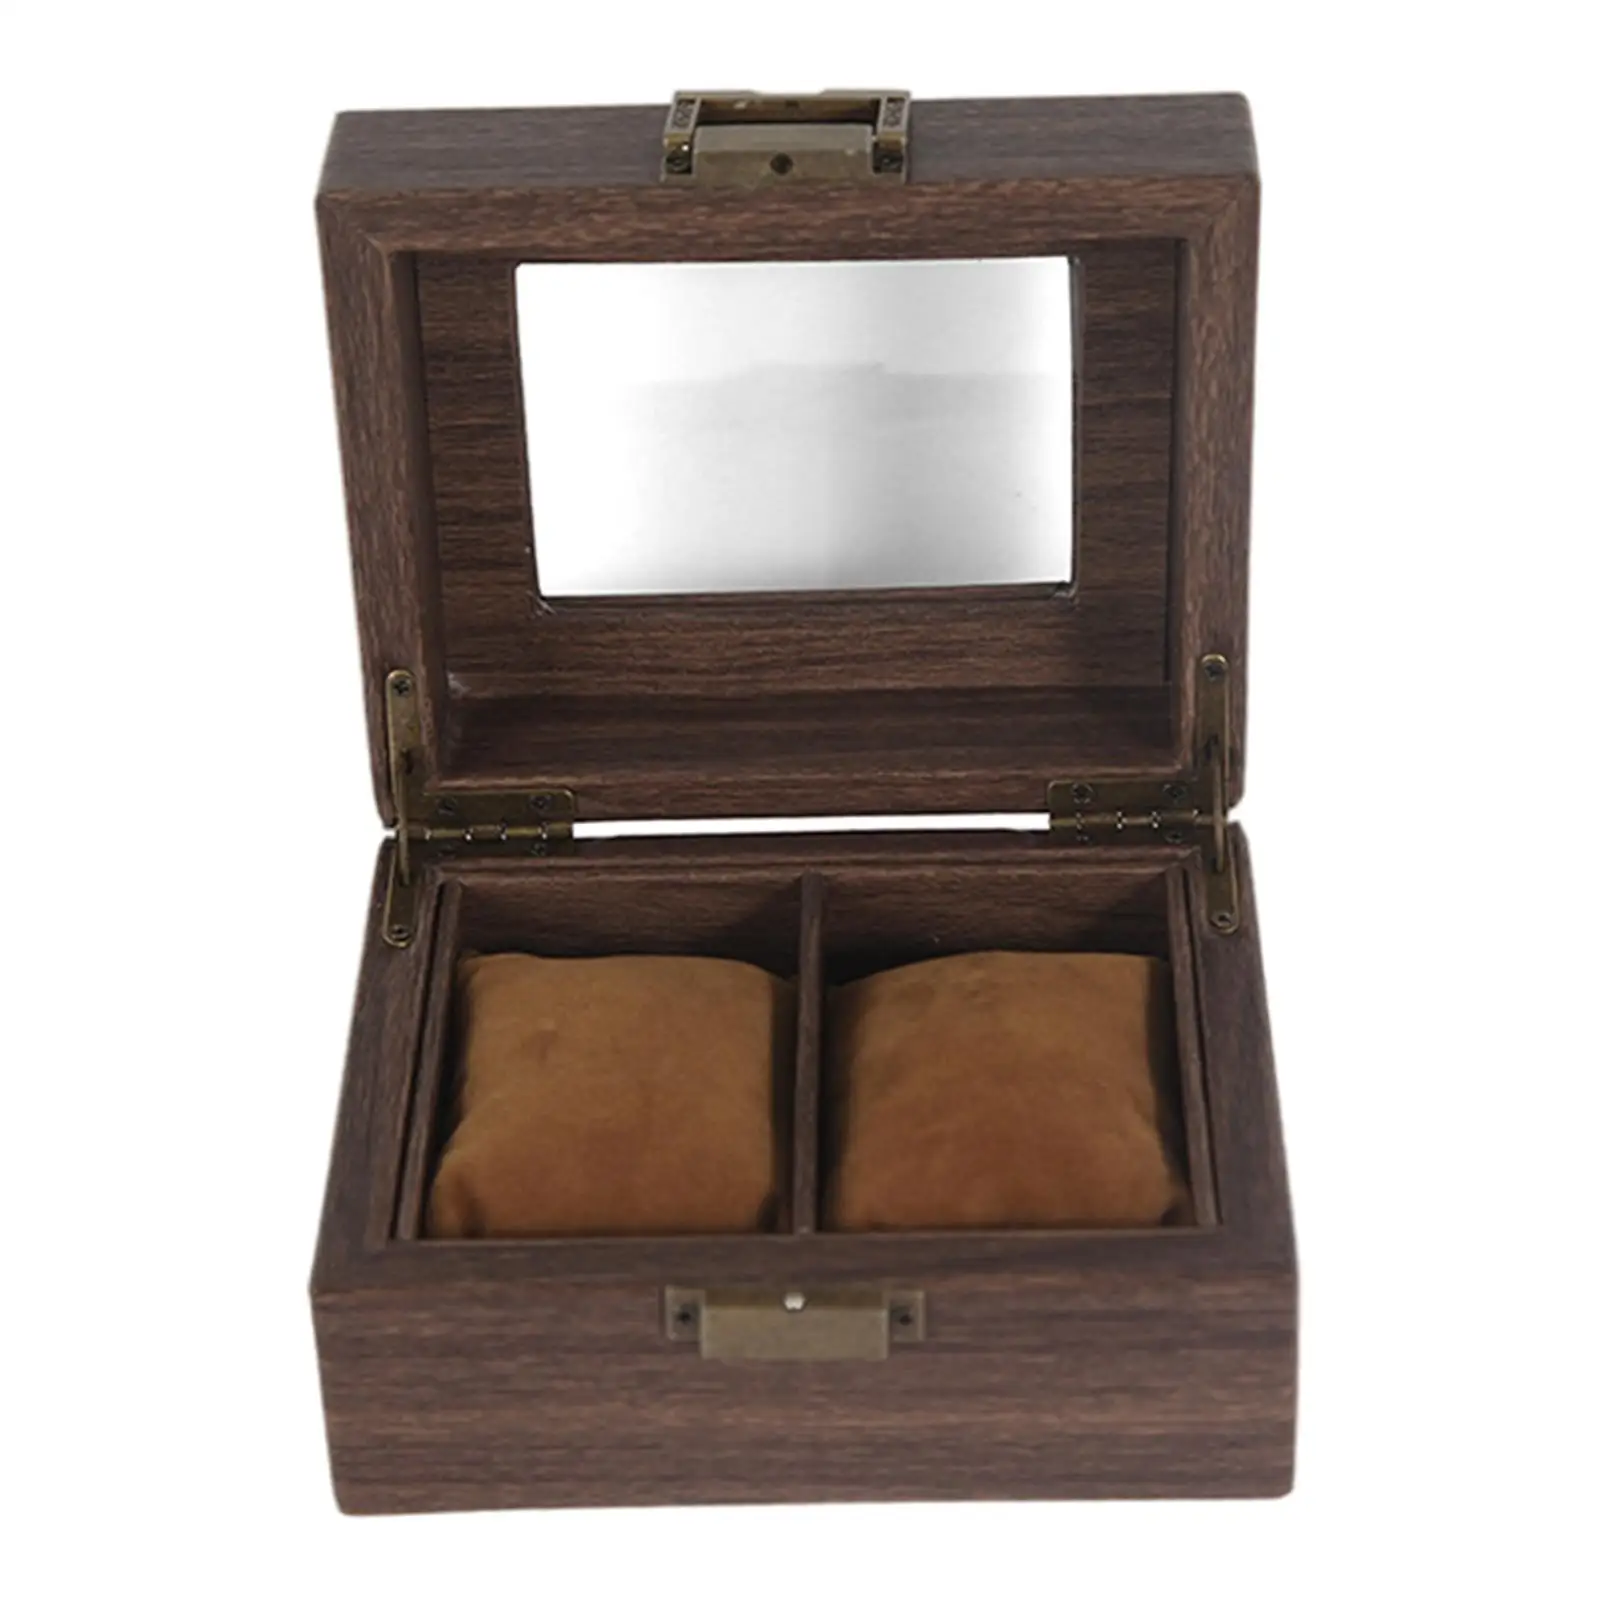 Watch Display Case and Lock Portable W/Clear Top Wooden 2 Slot Jewelry Organizer Wrist Storage Box for Gifts Men Women